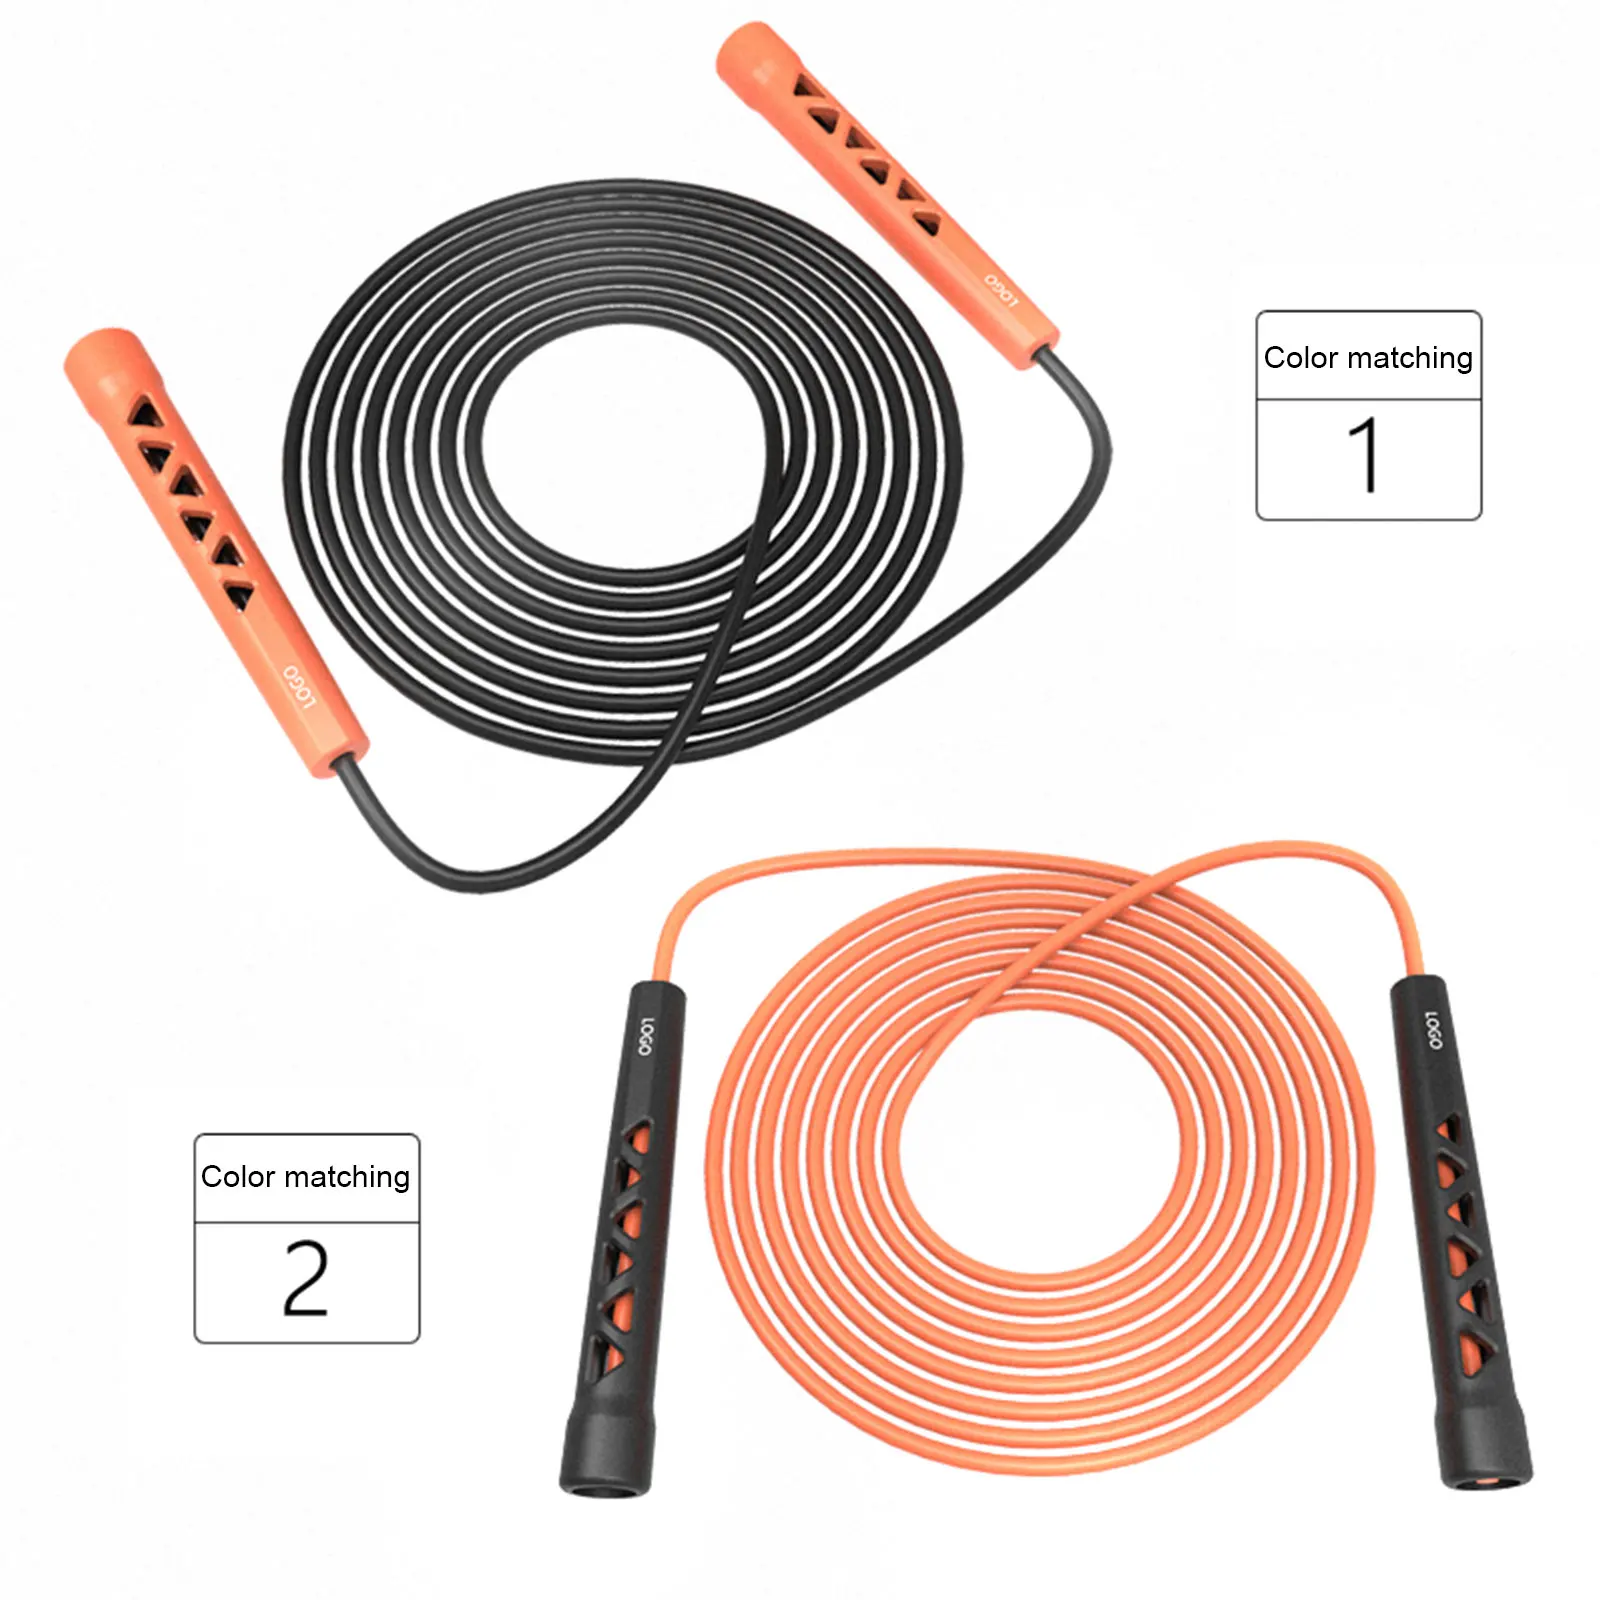 Jump Rope Sports Skipping Rope Anti-Slip Handles Exercise Boxing Fitness Training Tool For Adults Children